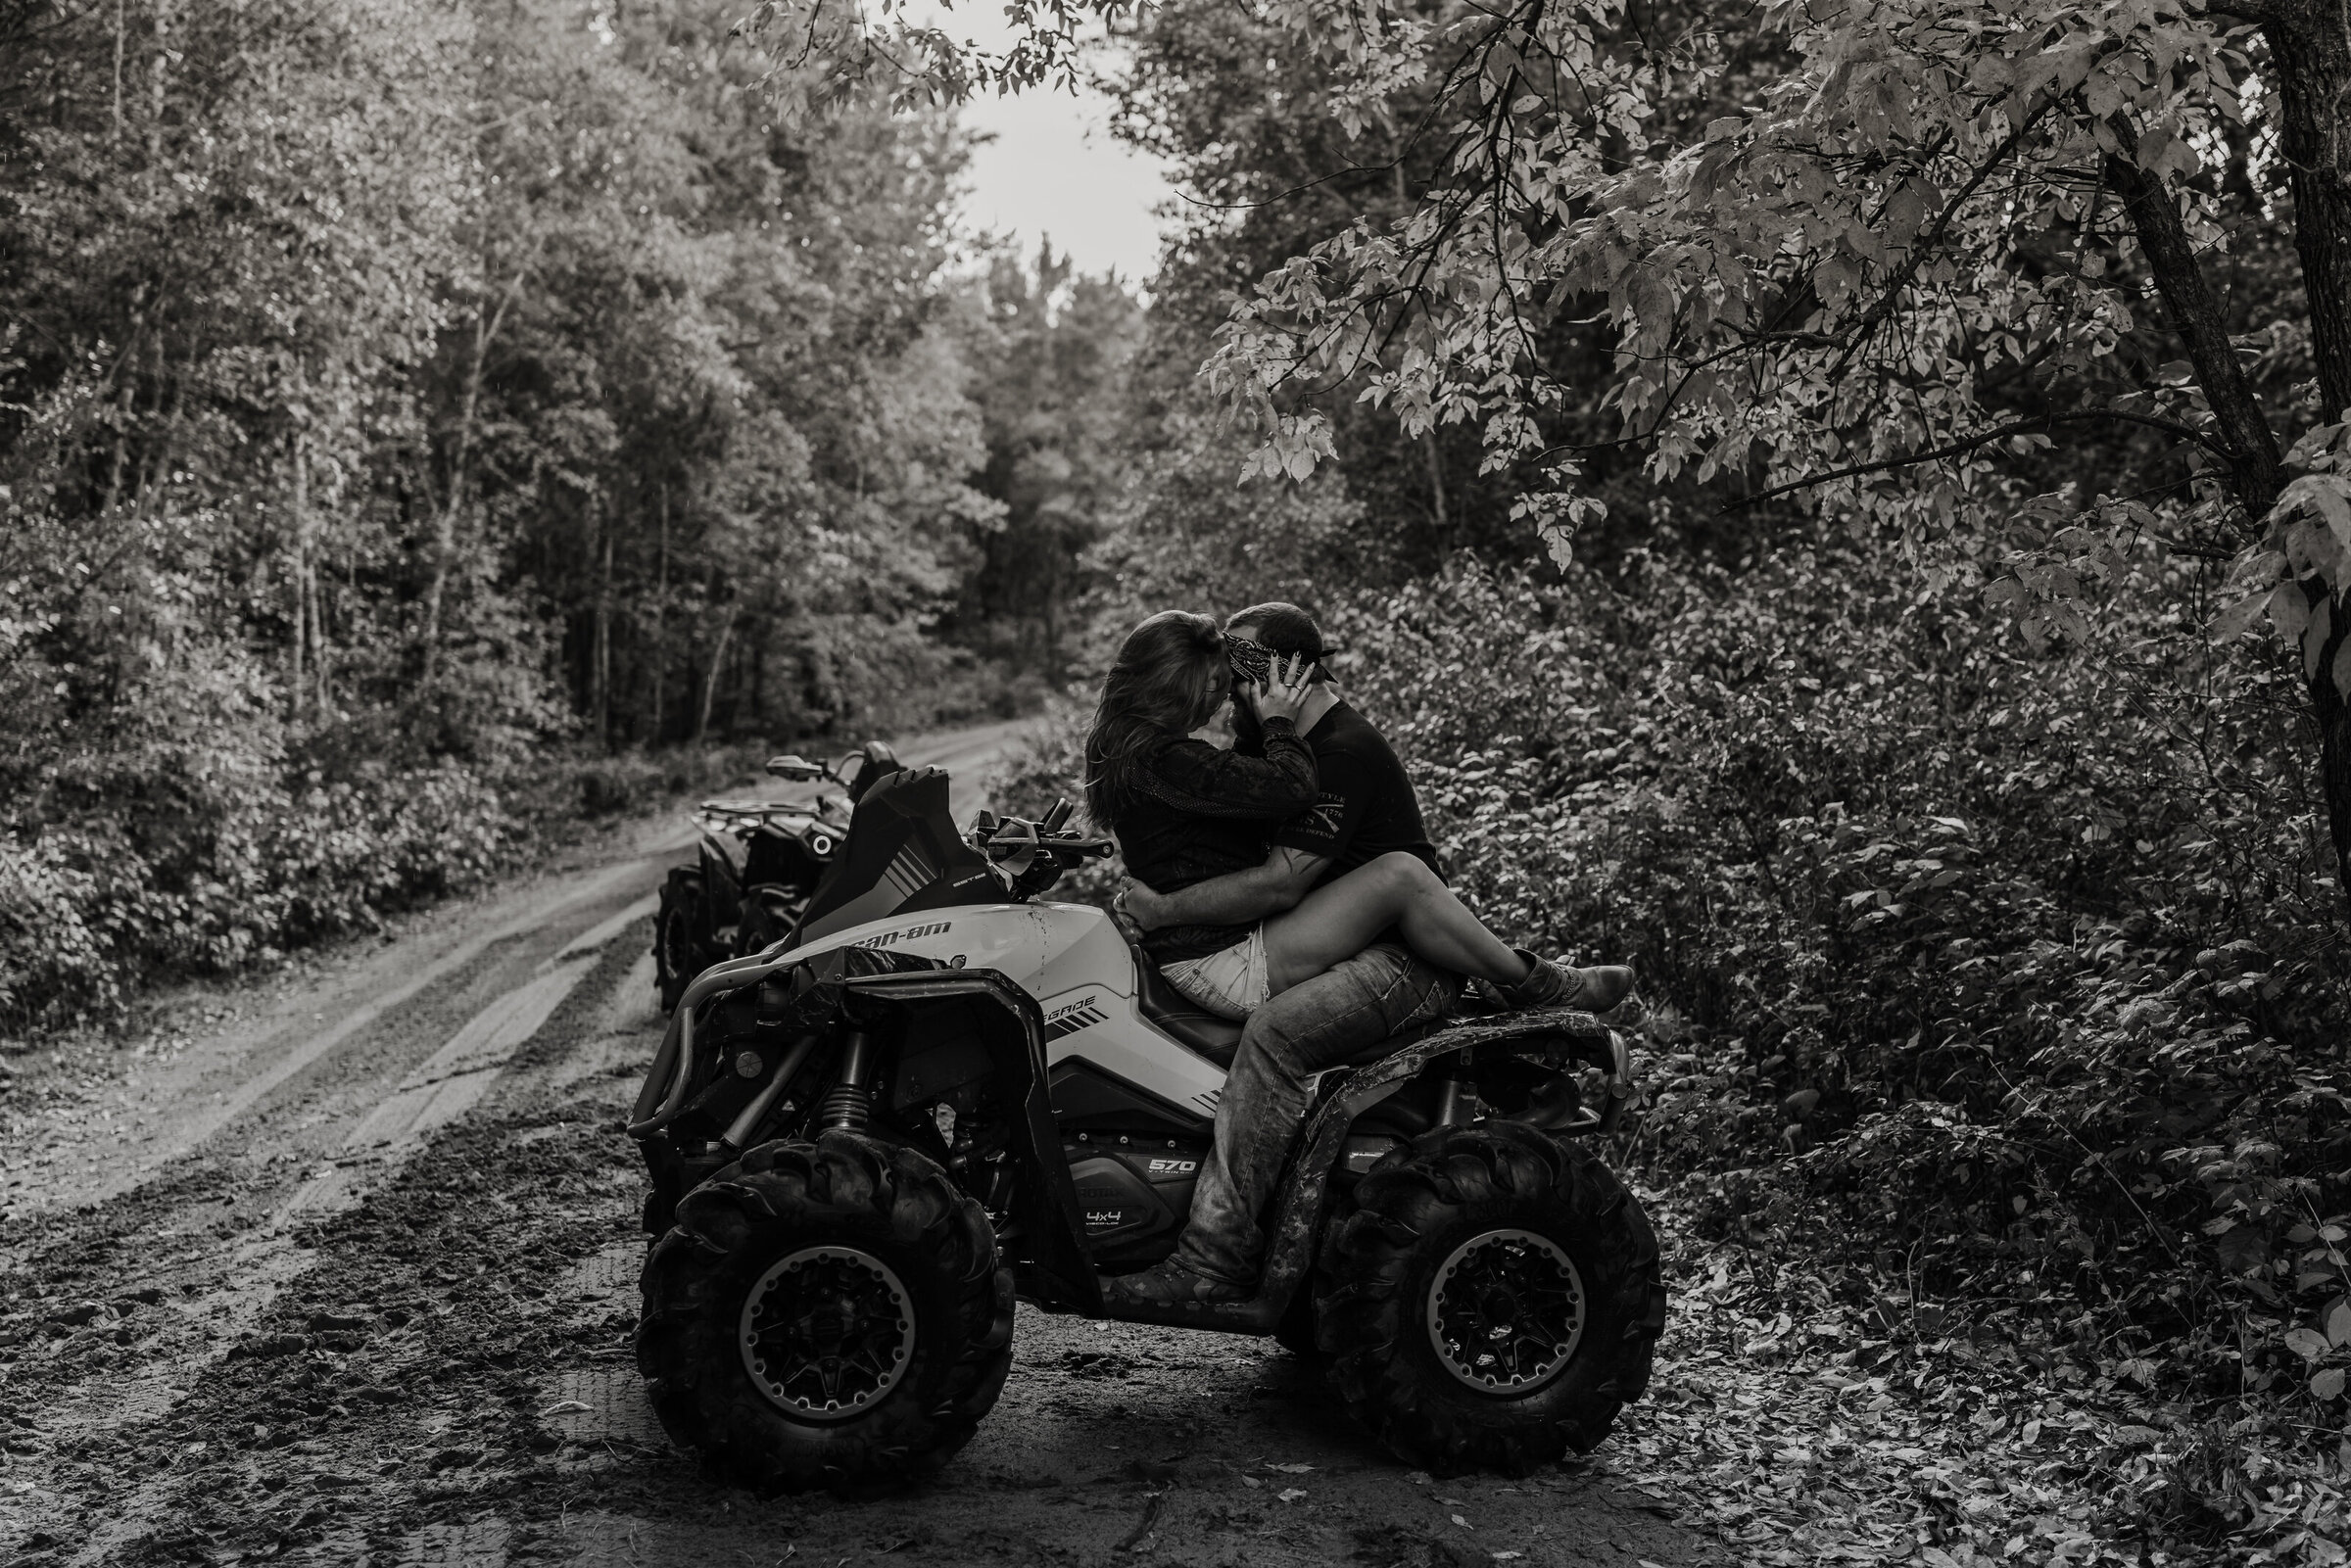 Couple sitting on ATV looking at each other